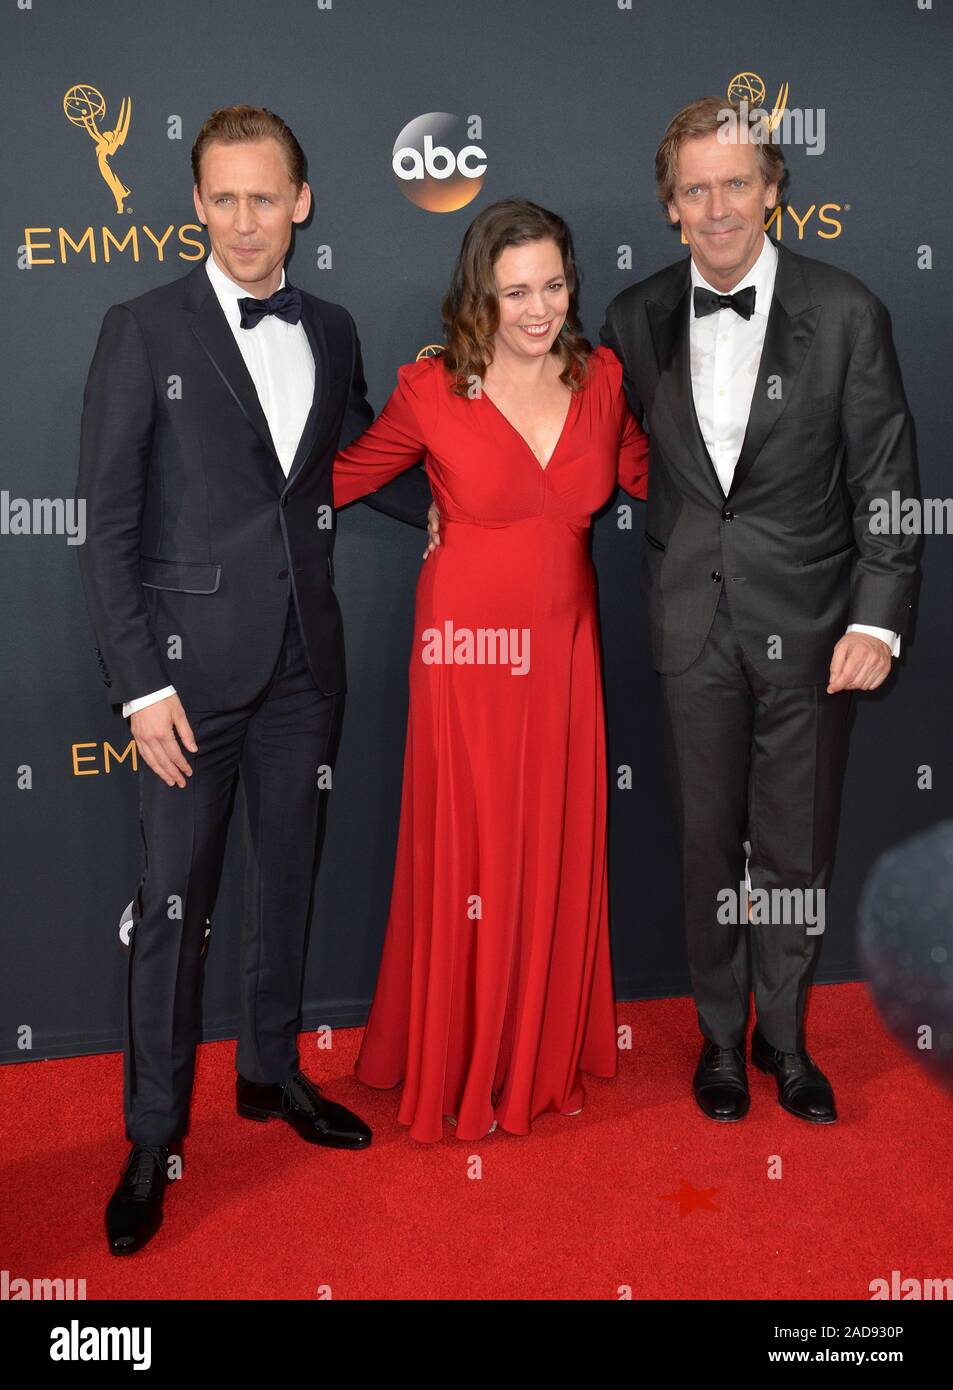 LOS ANGELES, CA. September 18, 2016: Actors Tom Hiddleston, Olivia Coleman & Hugh Laurie at the 68th Primetime Emmy Awards at the Microsoft Theatre L.A. Live. © 2016 Paul Smith / Featureflash Stock Photo